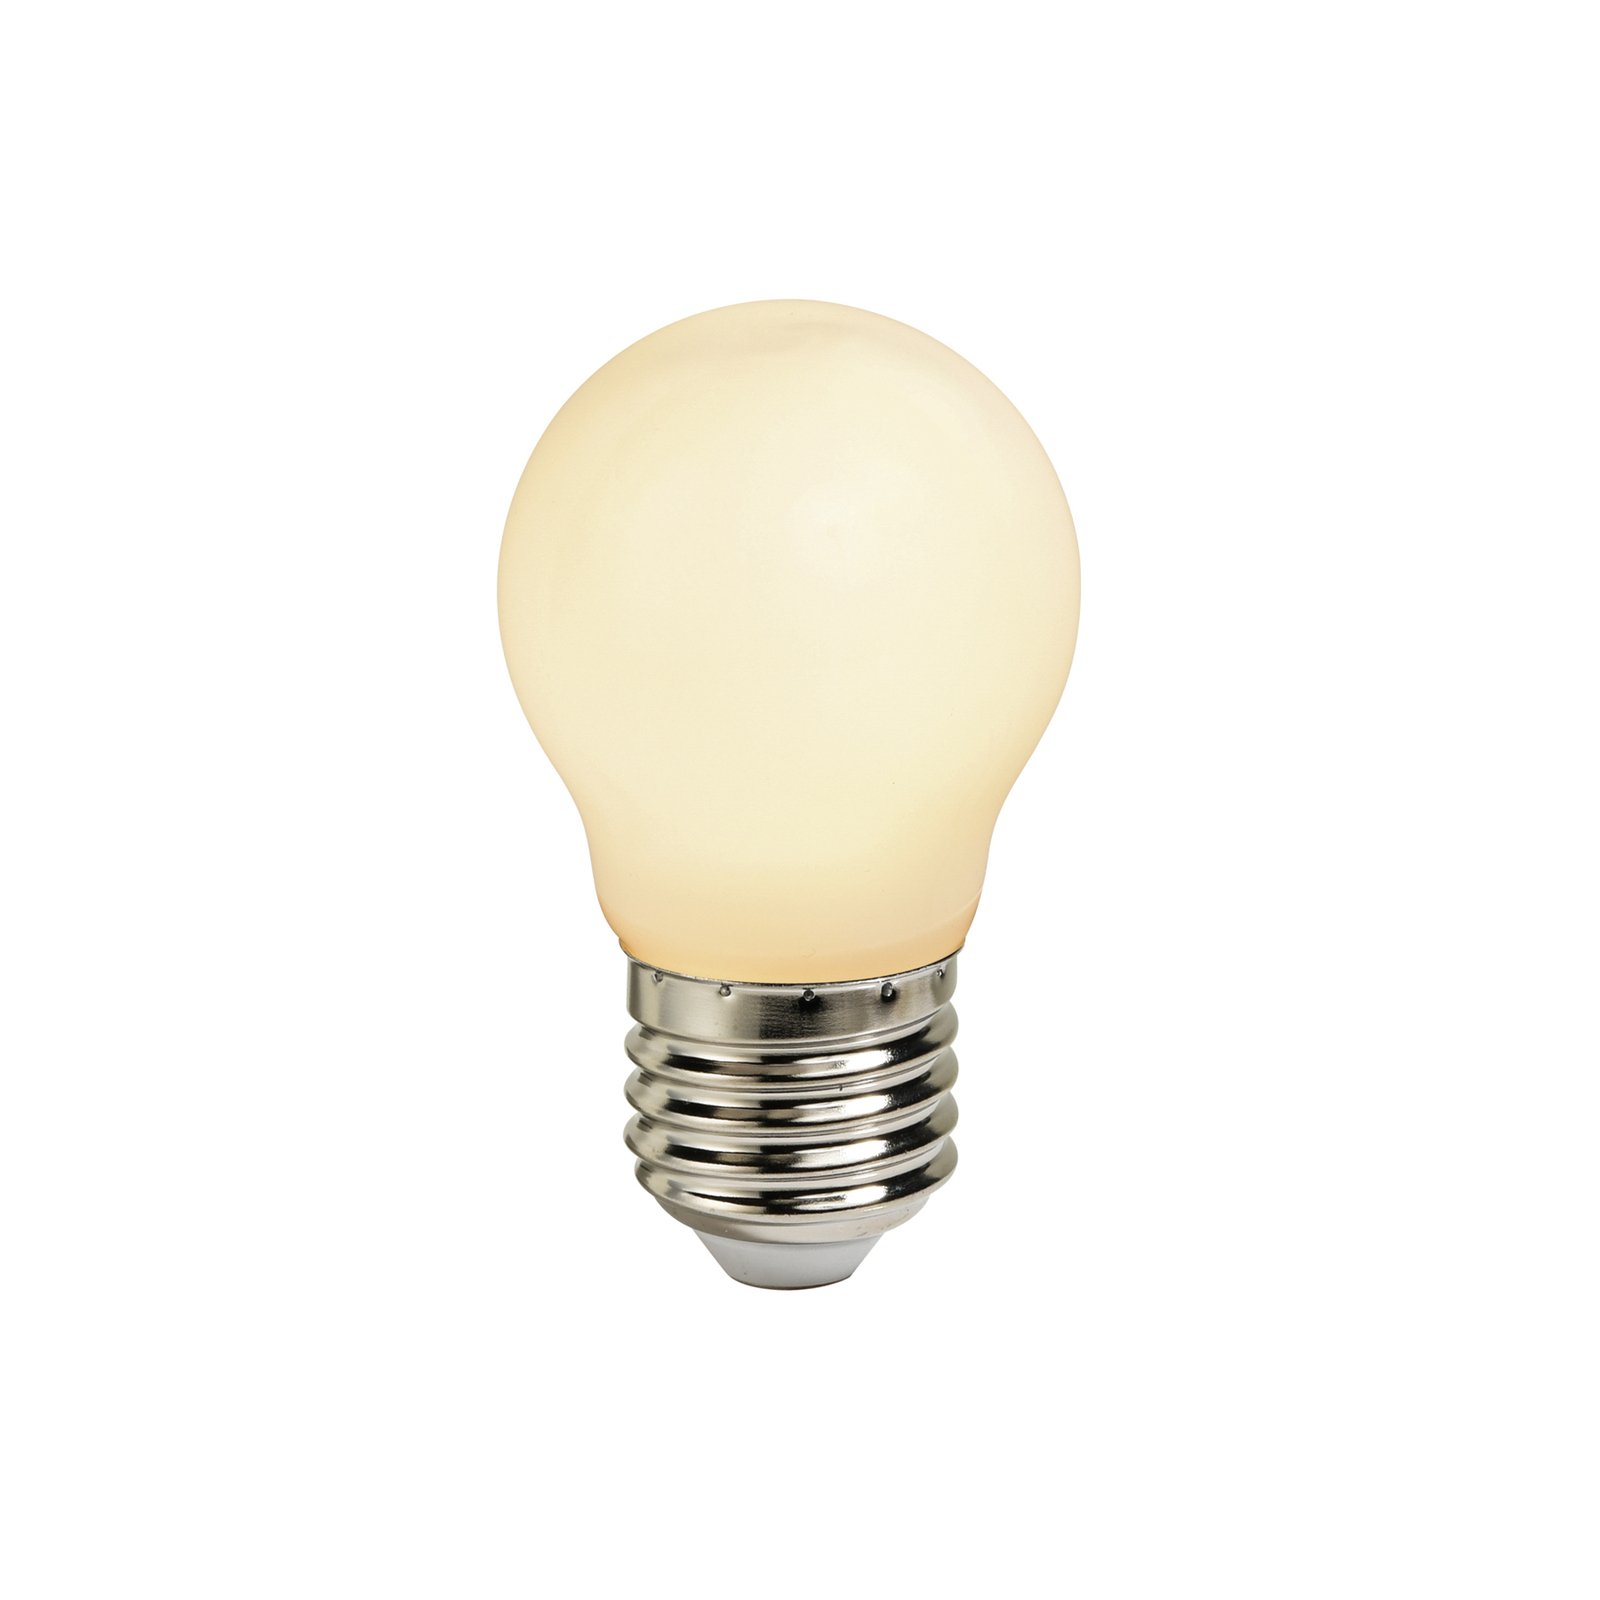 LED bulb G45 E27 4.7W CCT 560lm smart dimmable